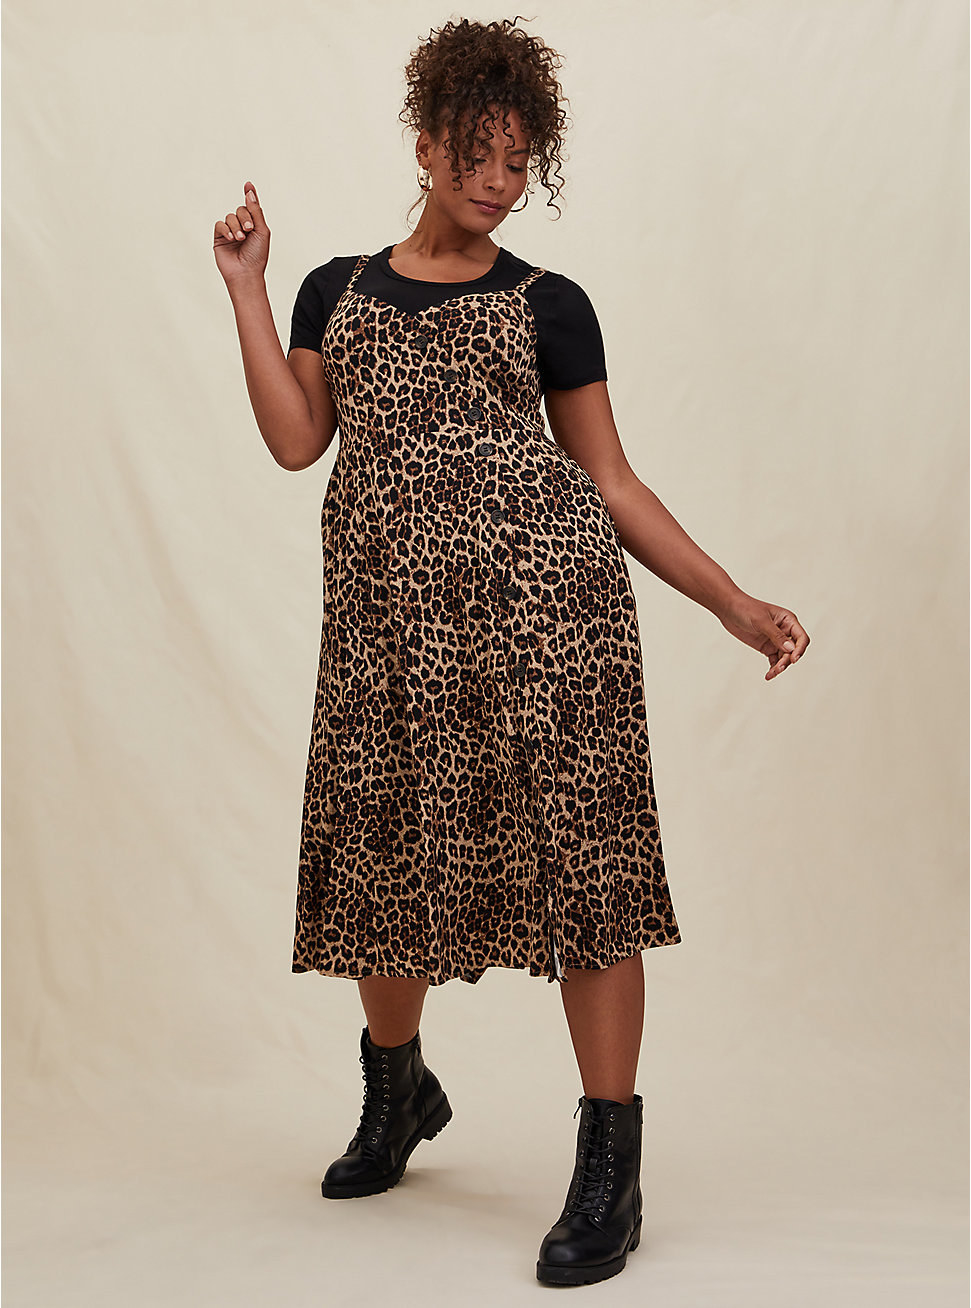 model in the dress with asymmetrical buttons on top over a black tee